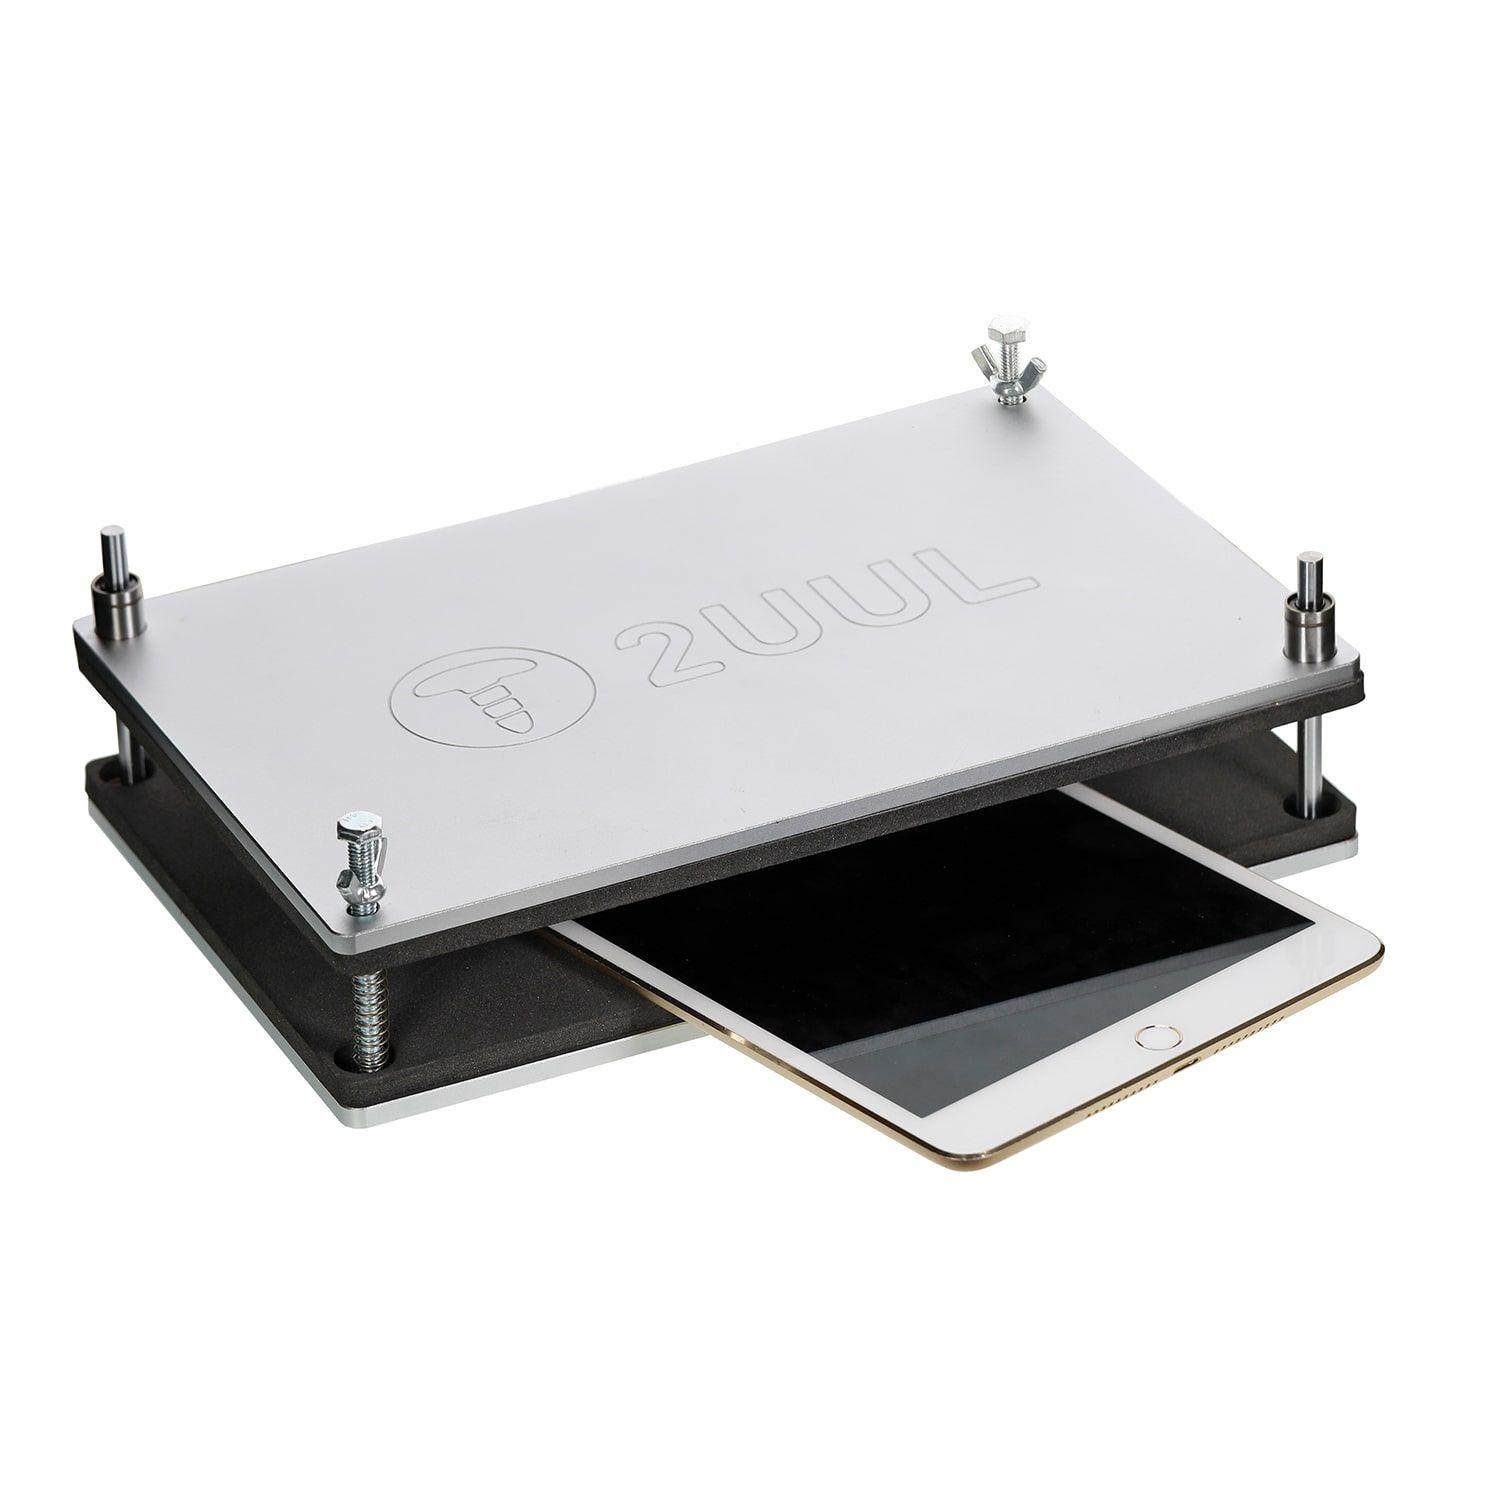 Clamp / Press for screen / LCD repair 2UUL for smartphones and tablets